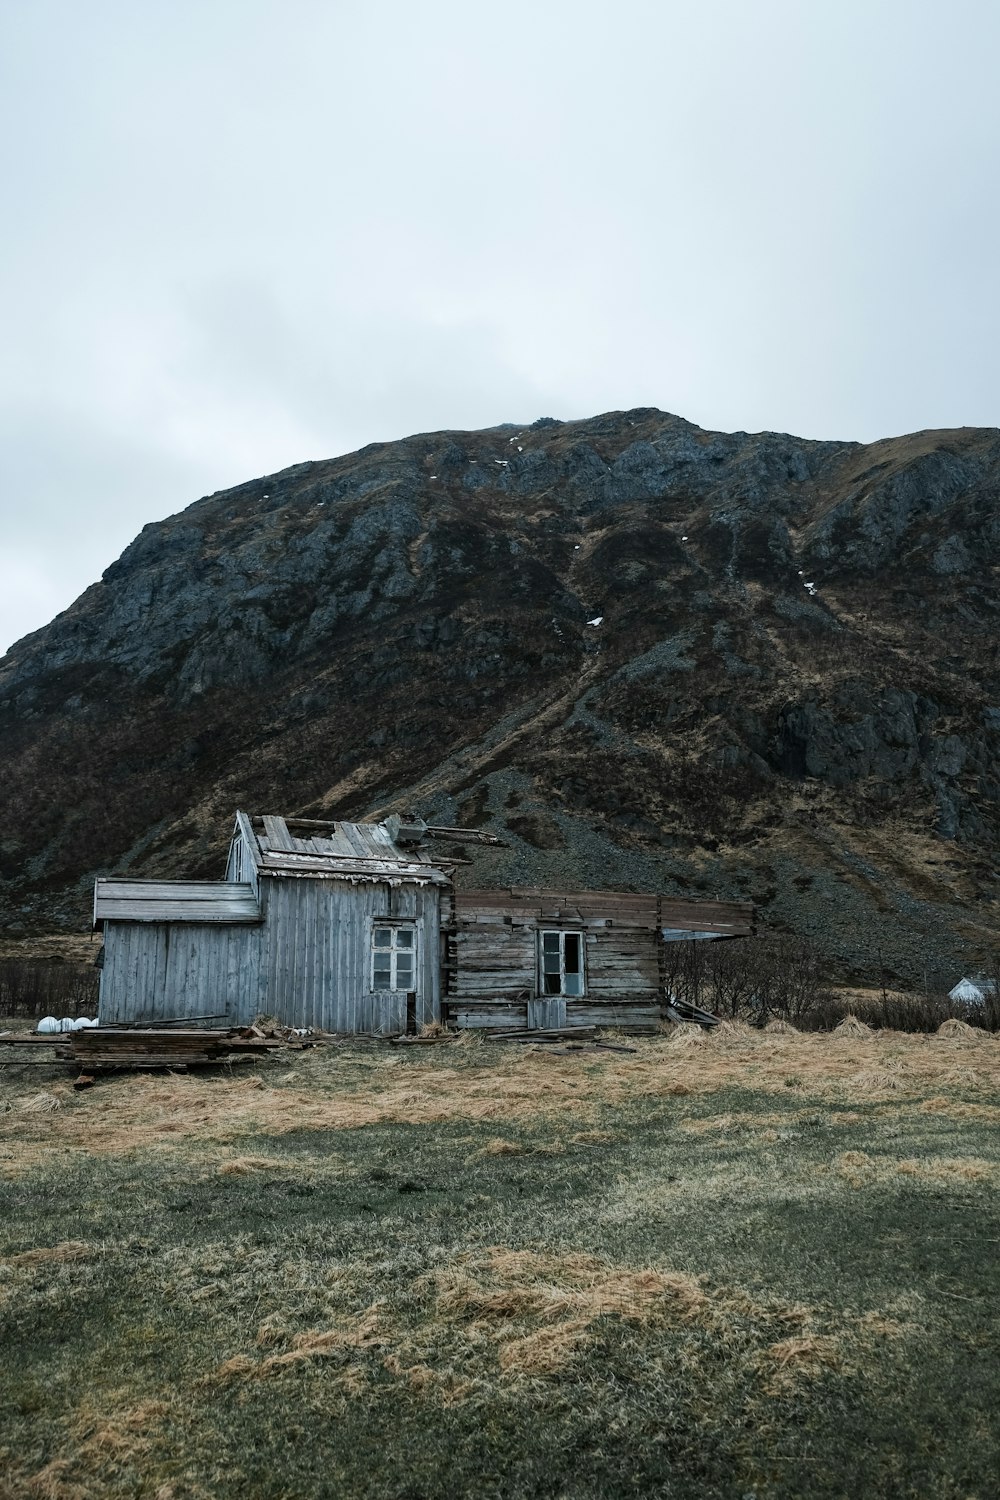 an old shack in a field with a mountain in the background